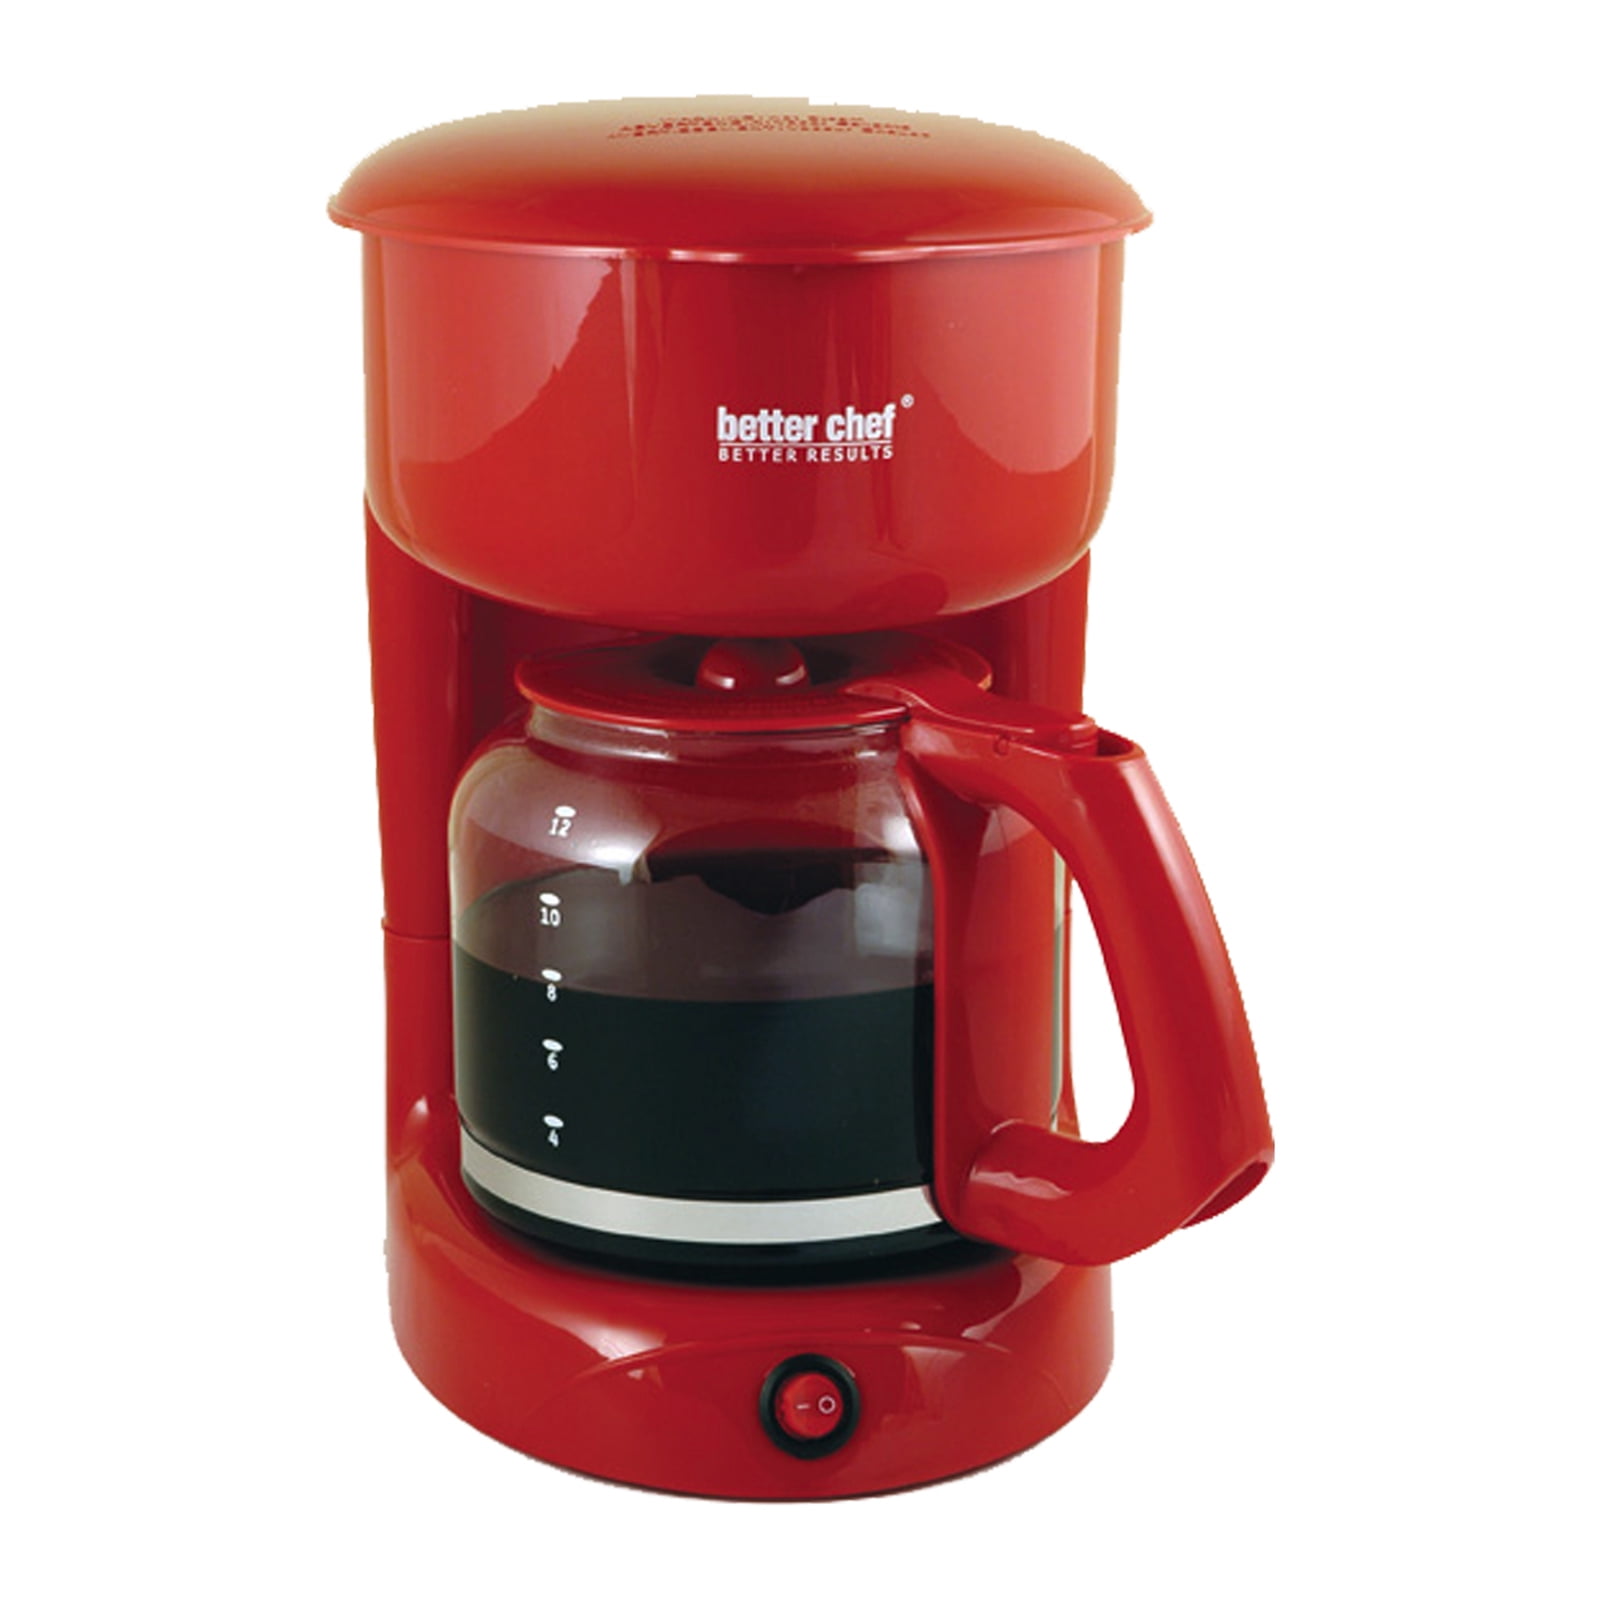 Better Chef 12cup Drip Coffee Maker, Red